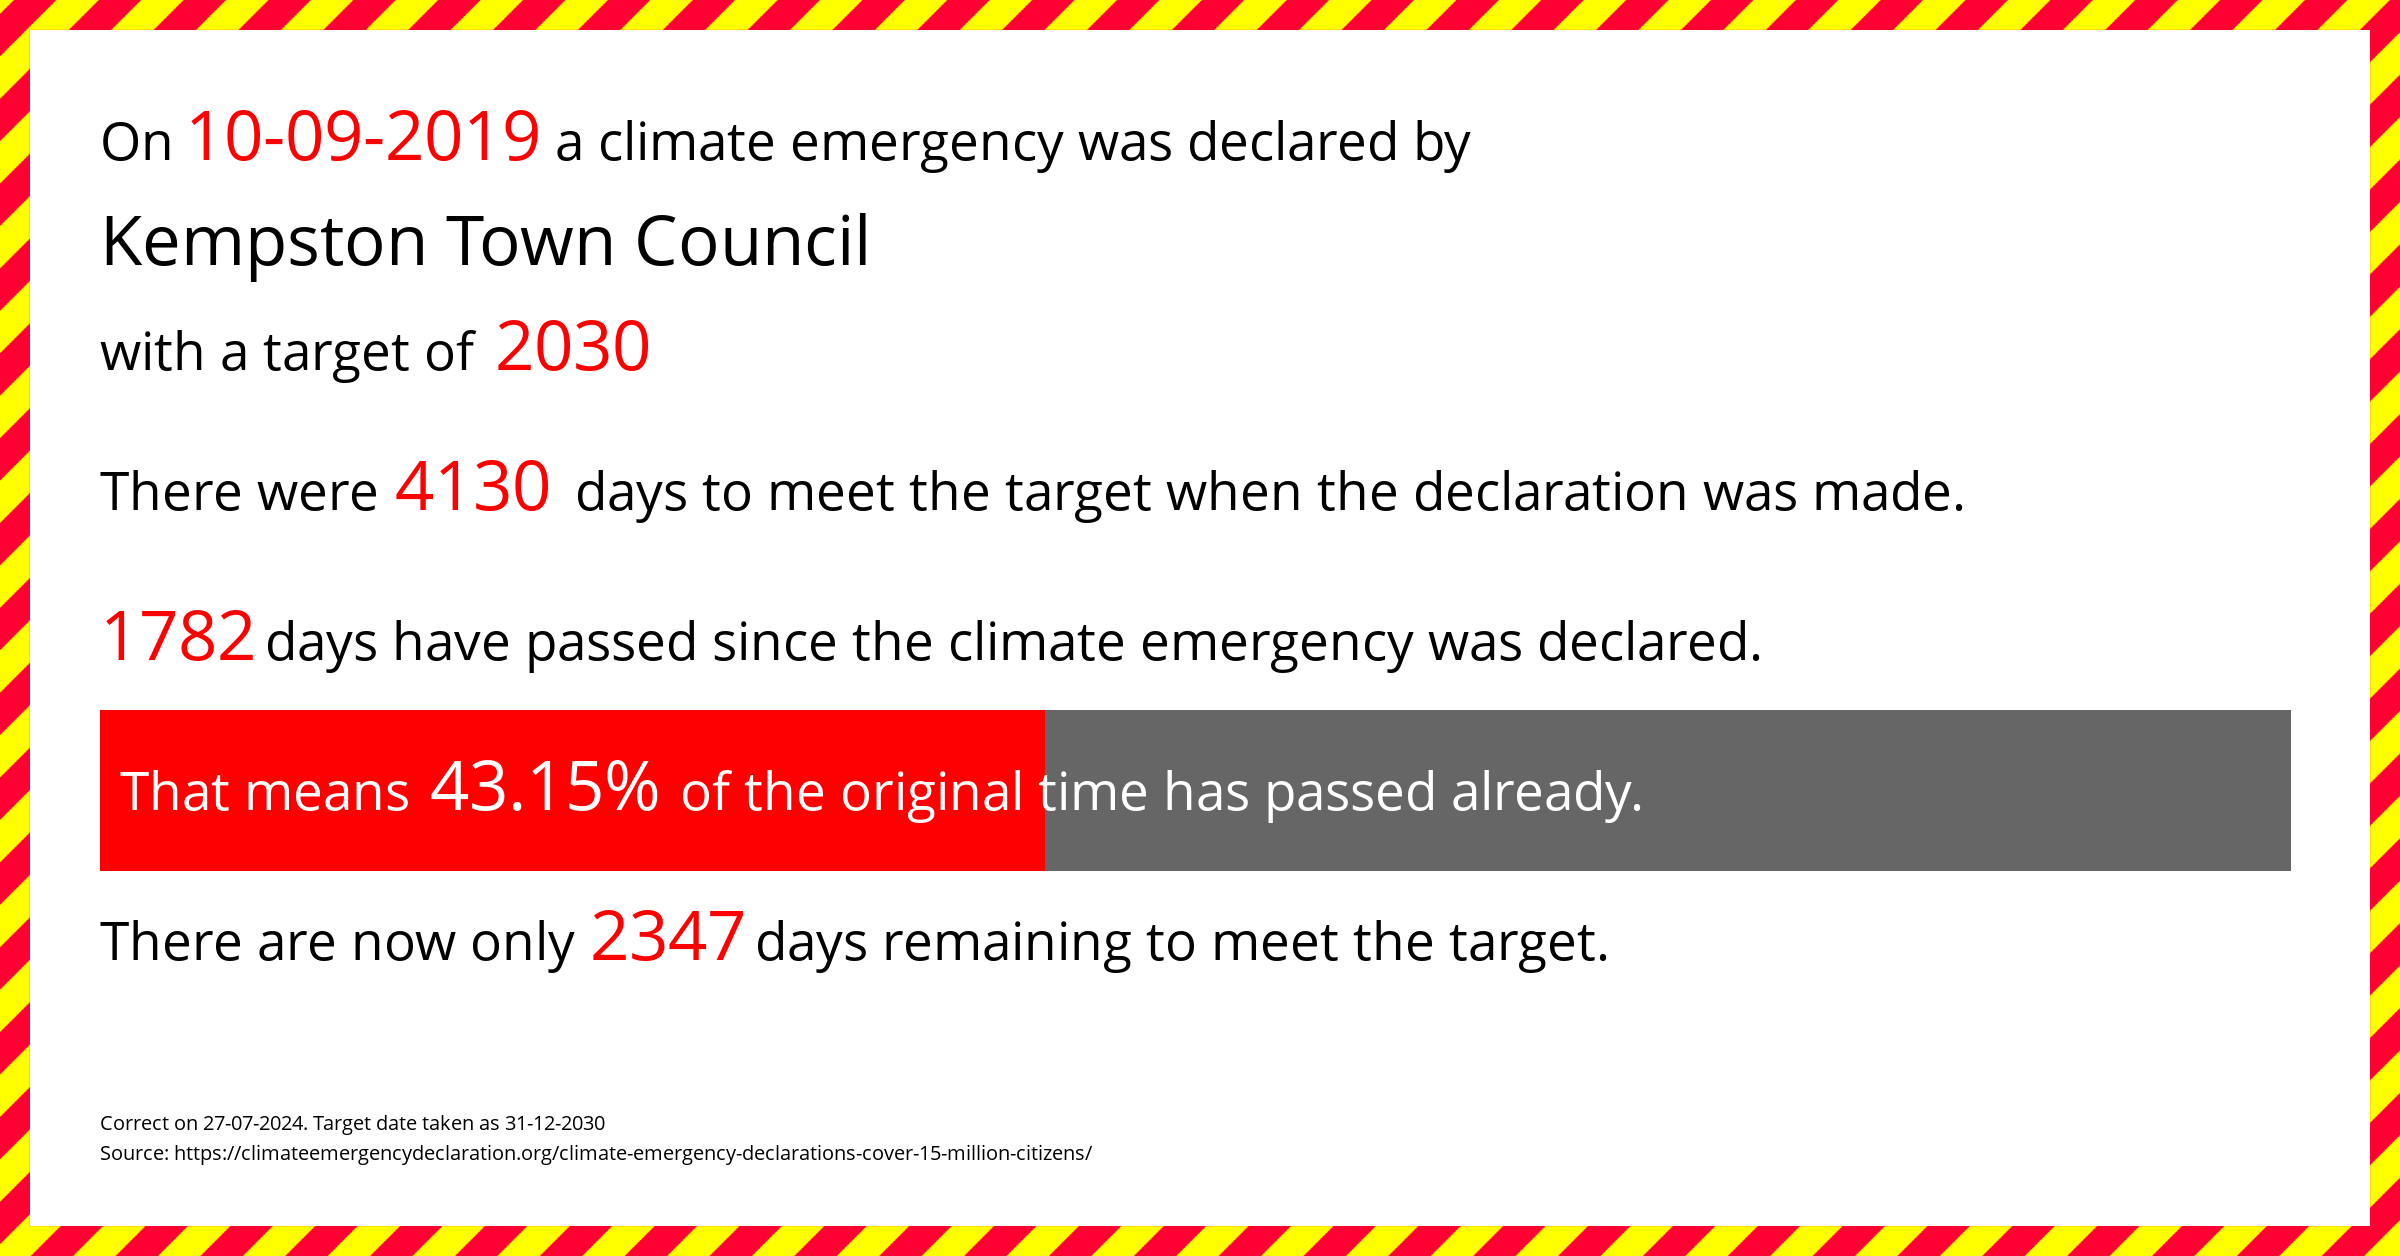 Kempston Town Council declared a Climate emergency on Tuesday 10th September 2019, with a target of 2030.